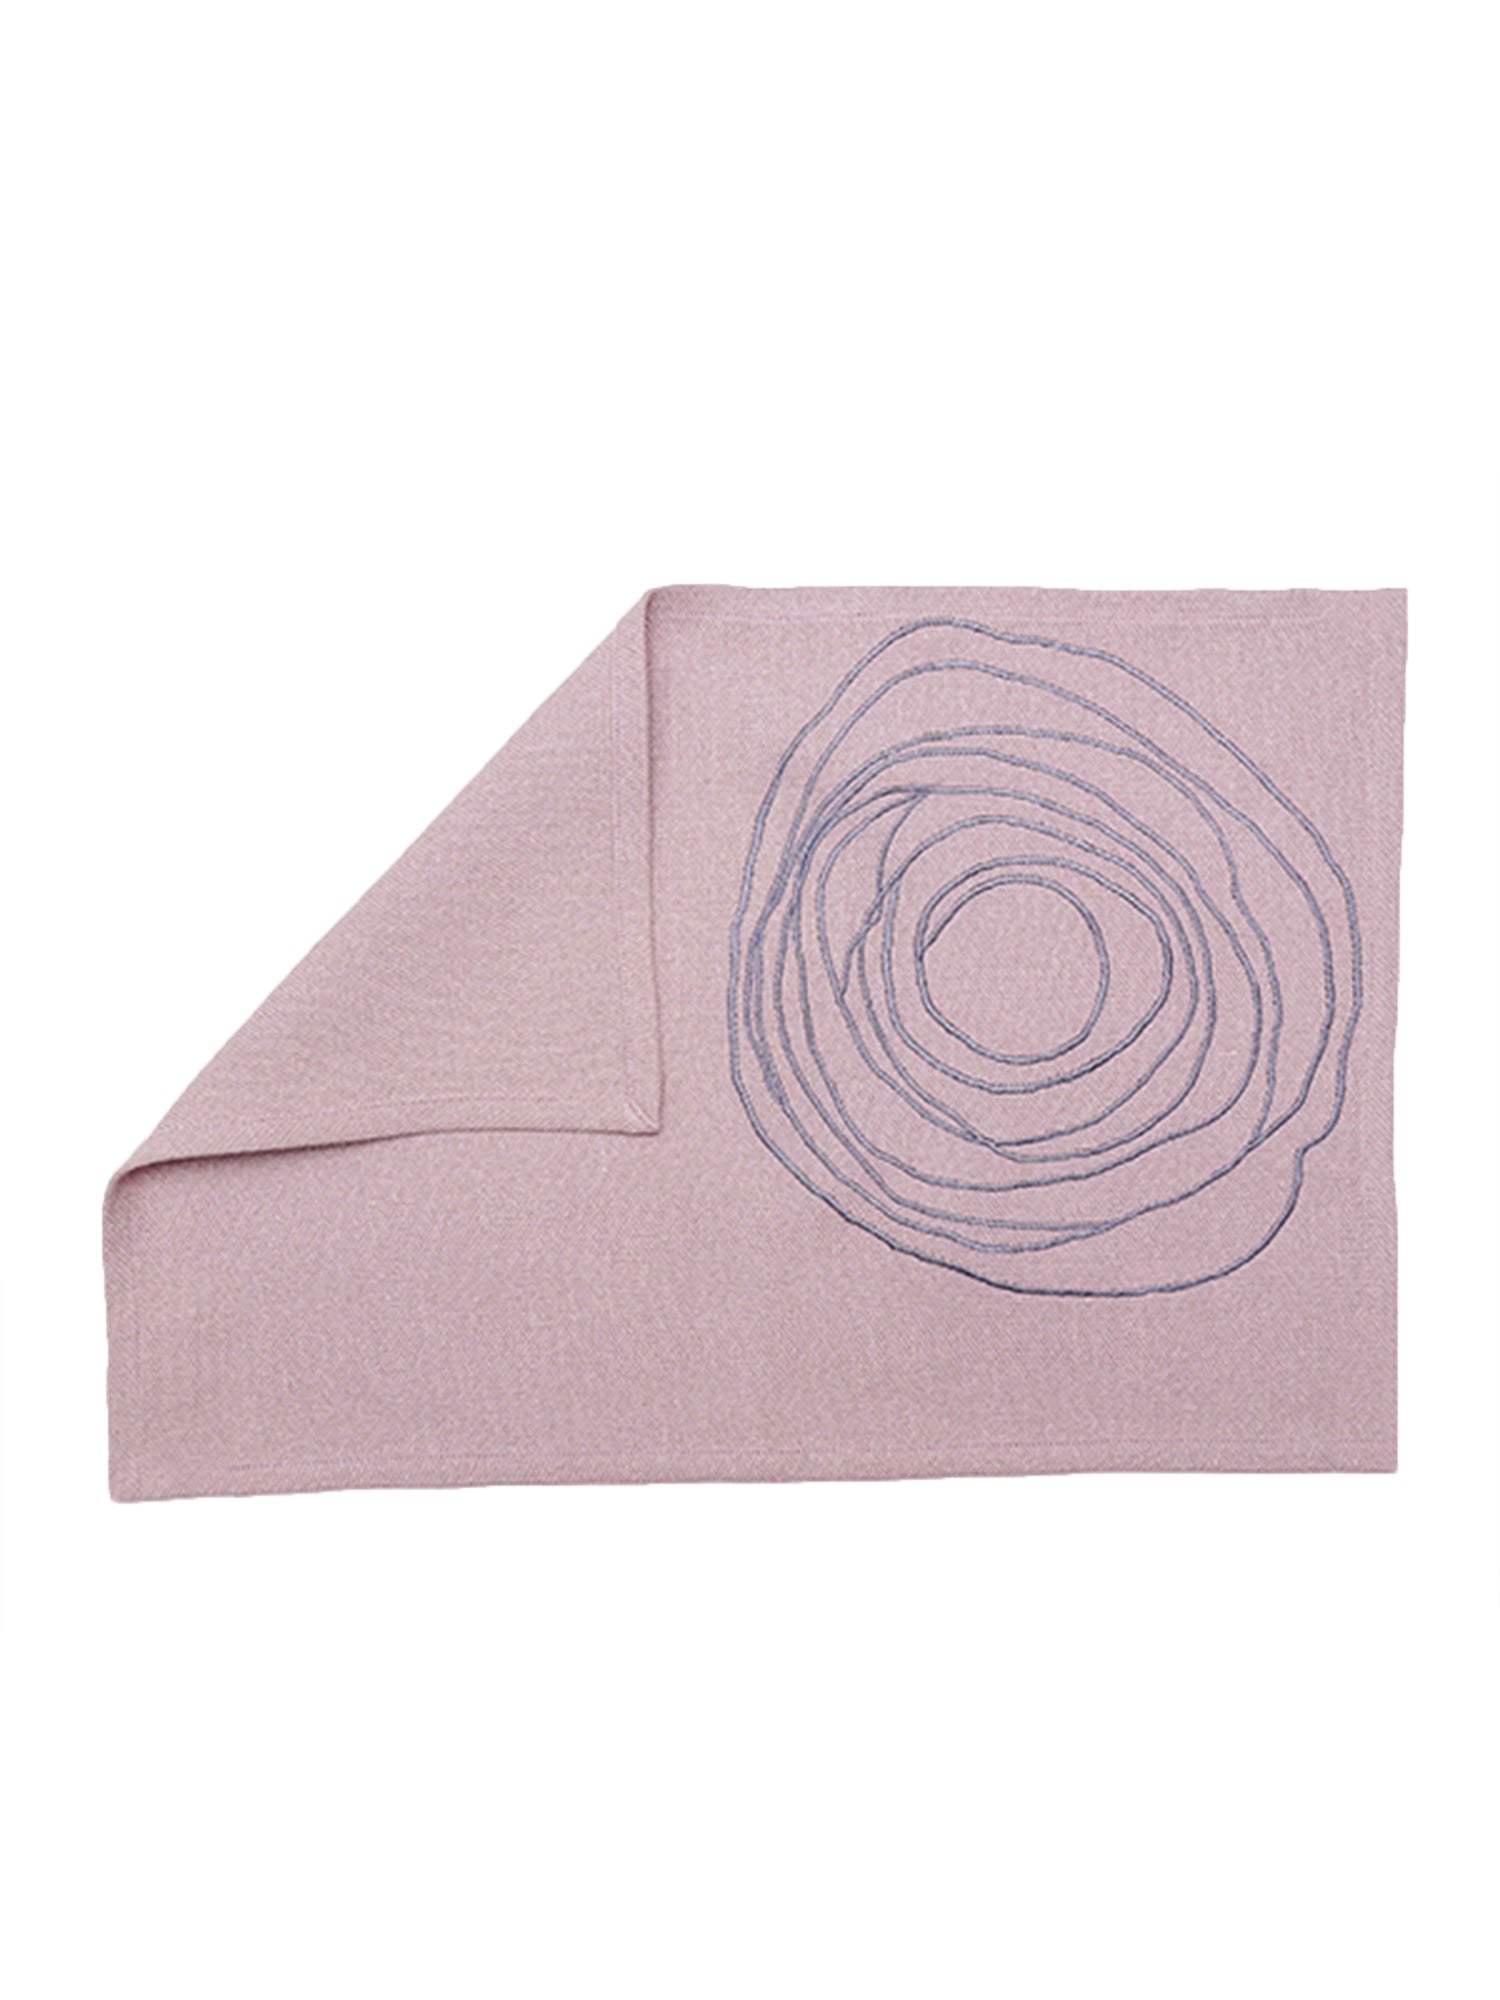 embrodiered placemat in pink color and contrast dark embroidery - 13x19 inch 